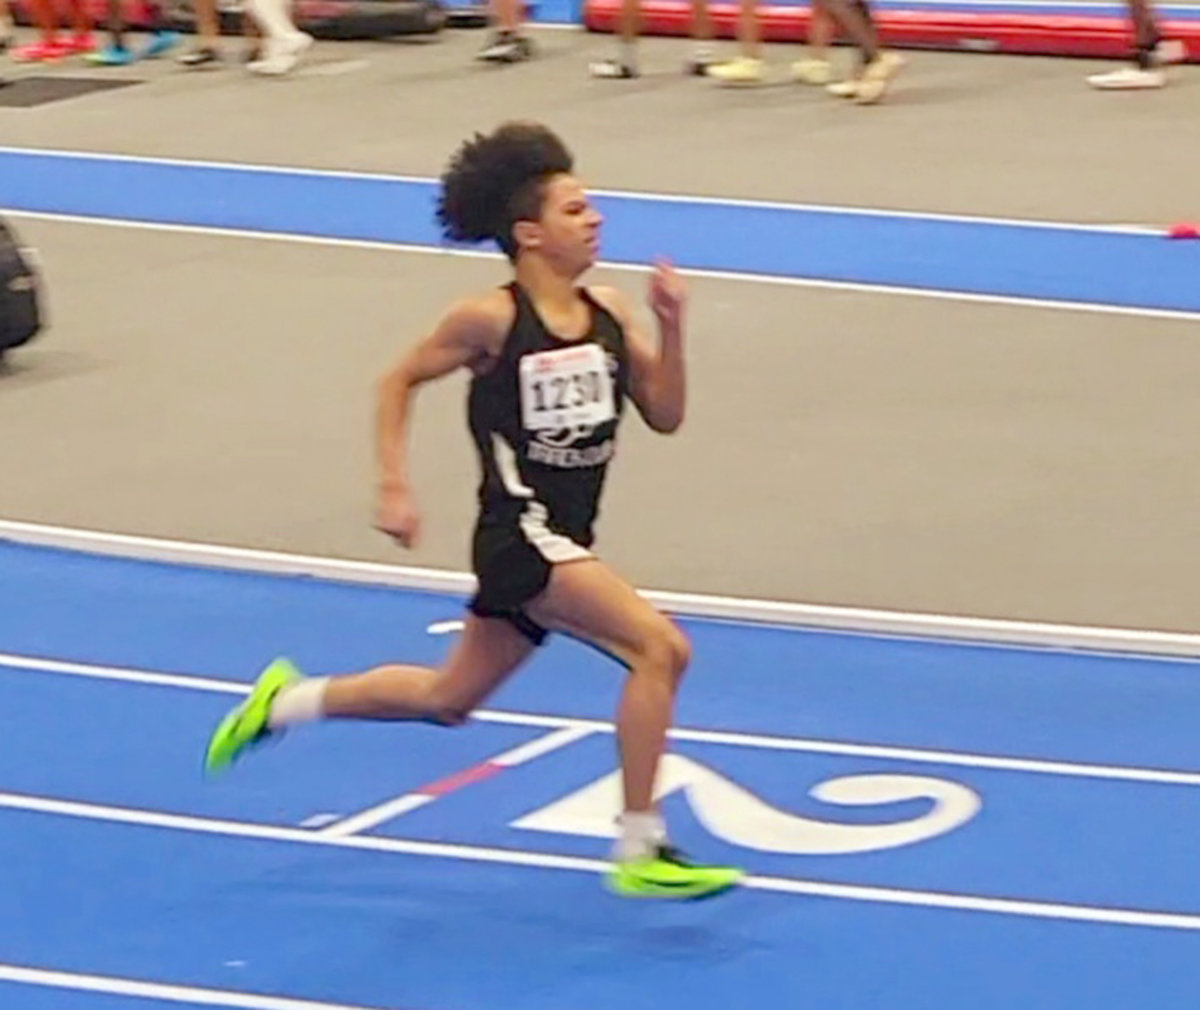 Willie Bellamy of Notre Dame had personal records in the 60, 200 and 400 for 14-year-olds at the 2023 AAU Indoor Track and Field Nationals in Virginia Beach.